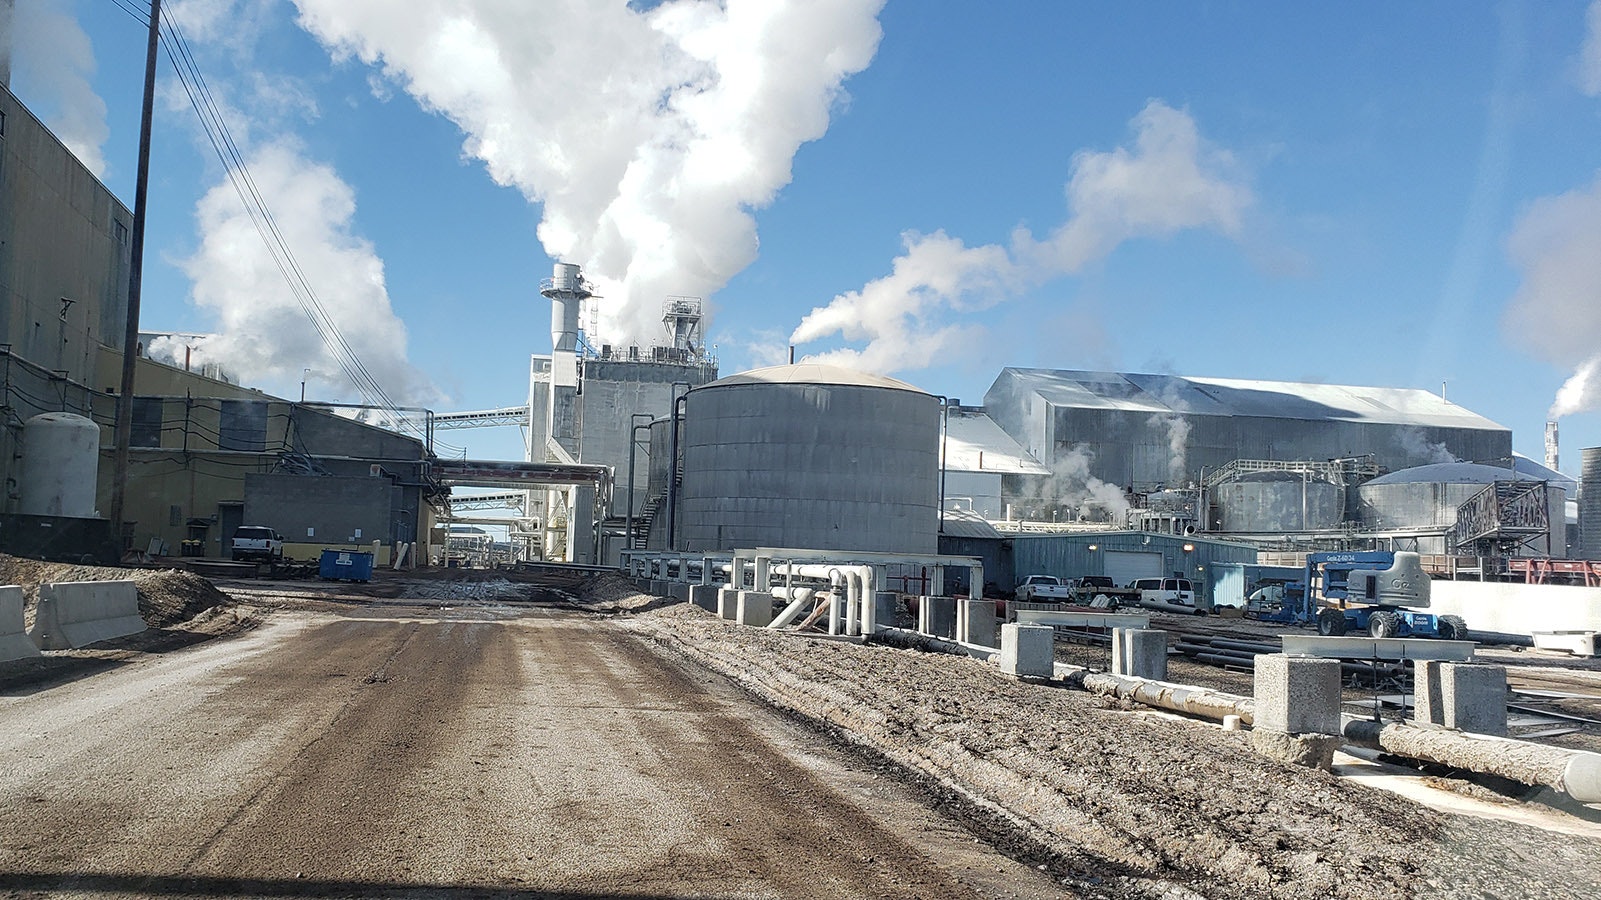 Above ground, Genesis Alkali has several processing facilities. The plumes of white are steam, not smoke.